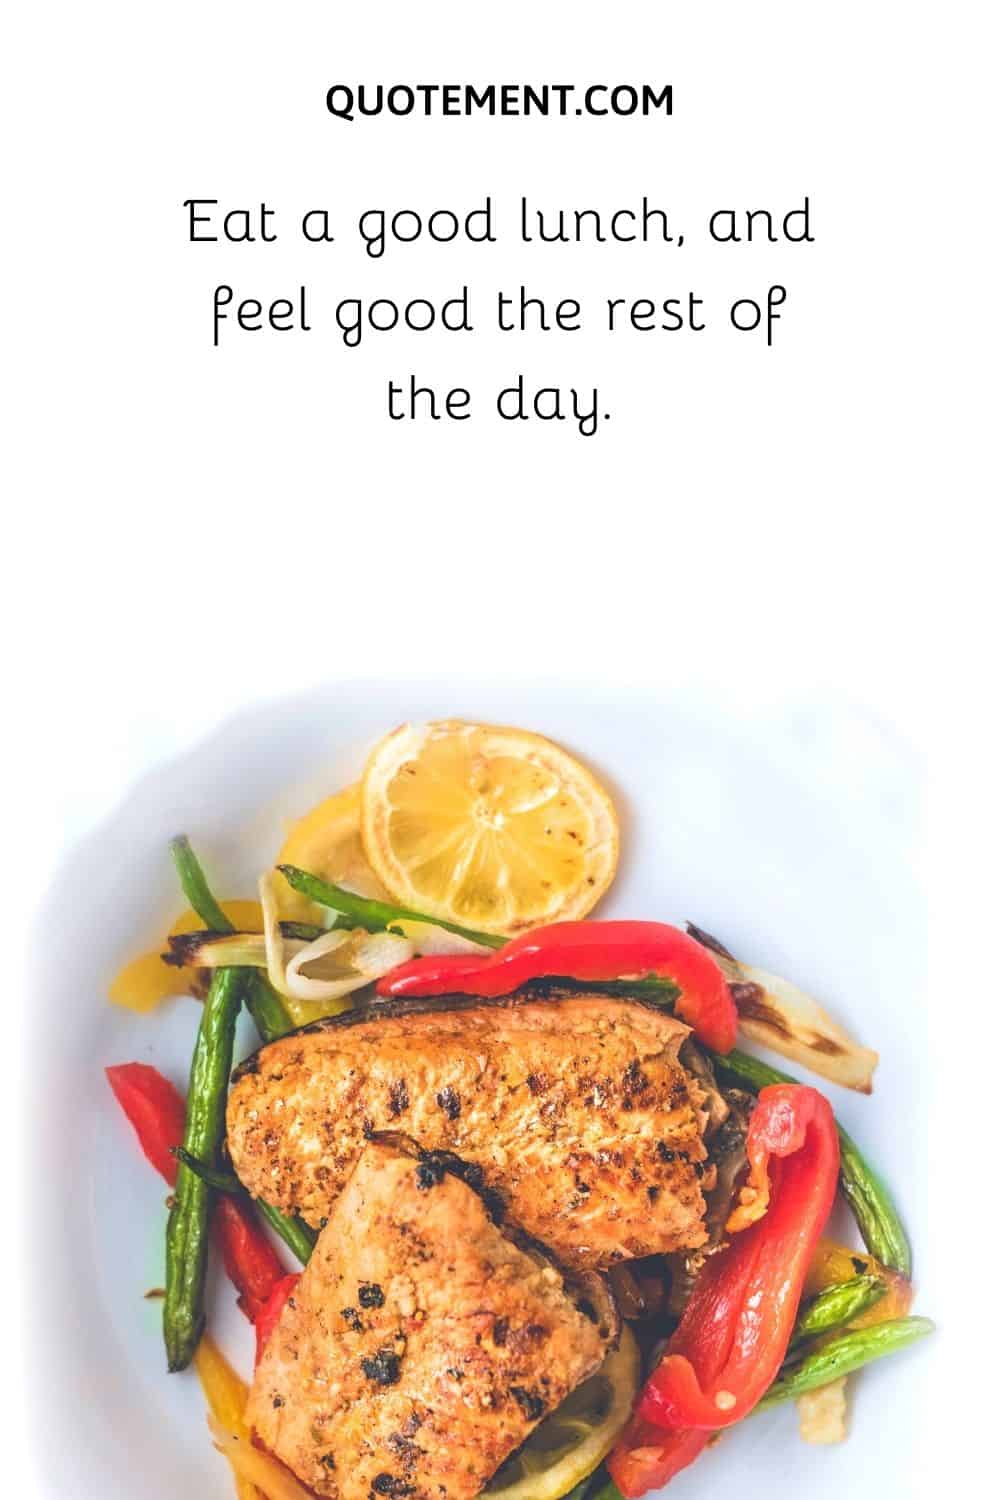 Eat a good lunch, and feel good the rest of the day.